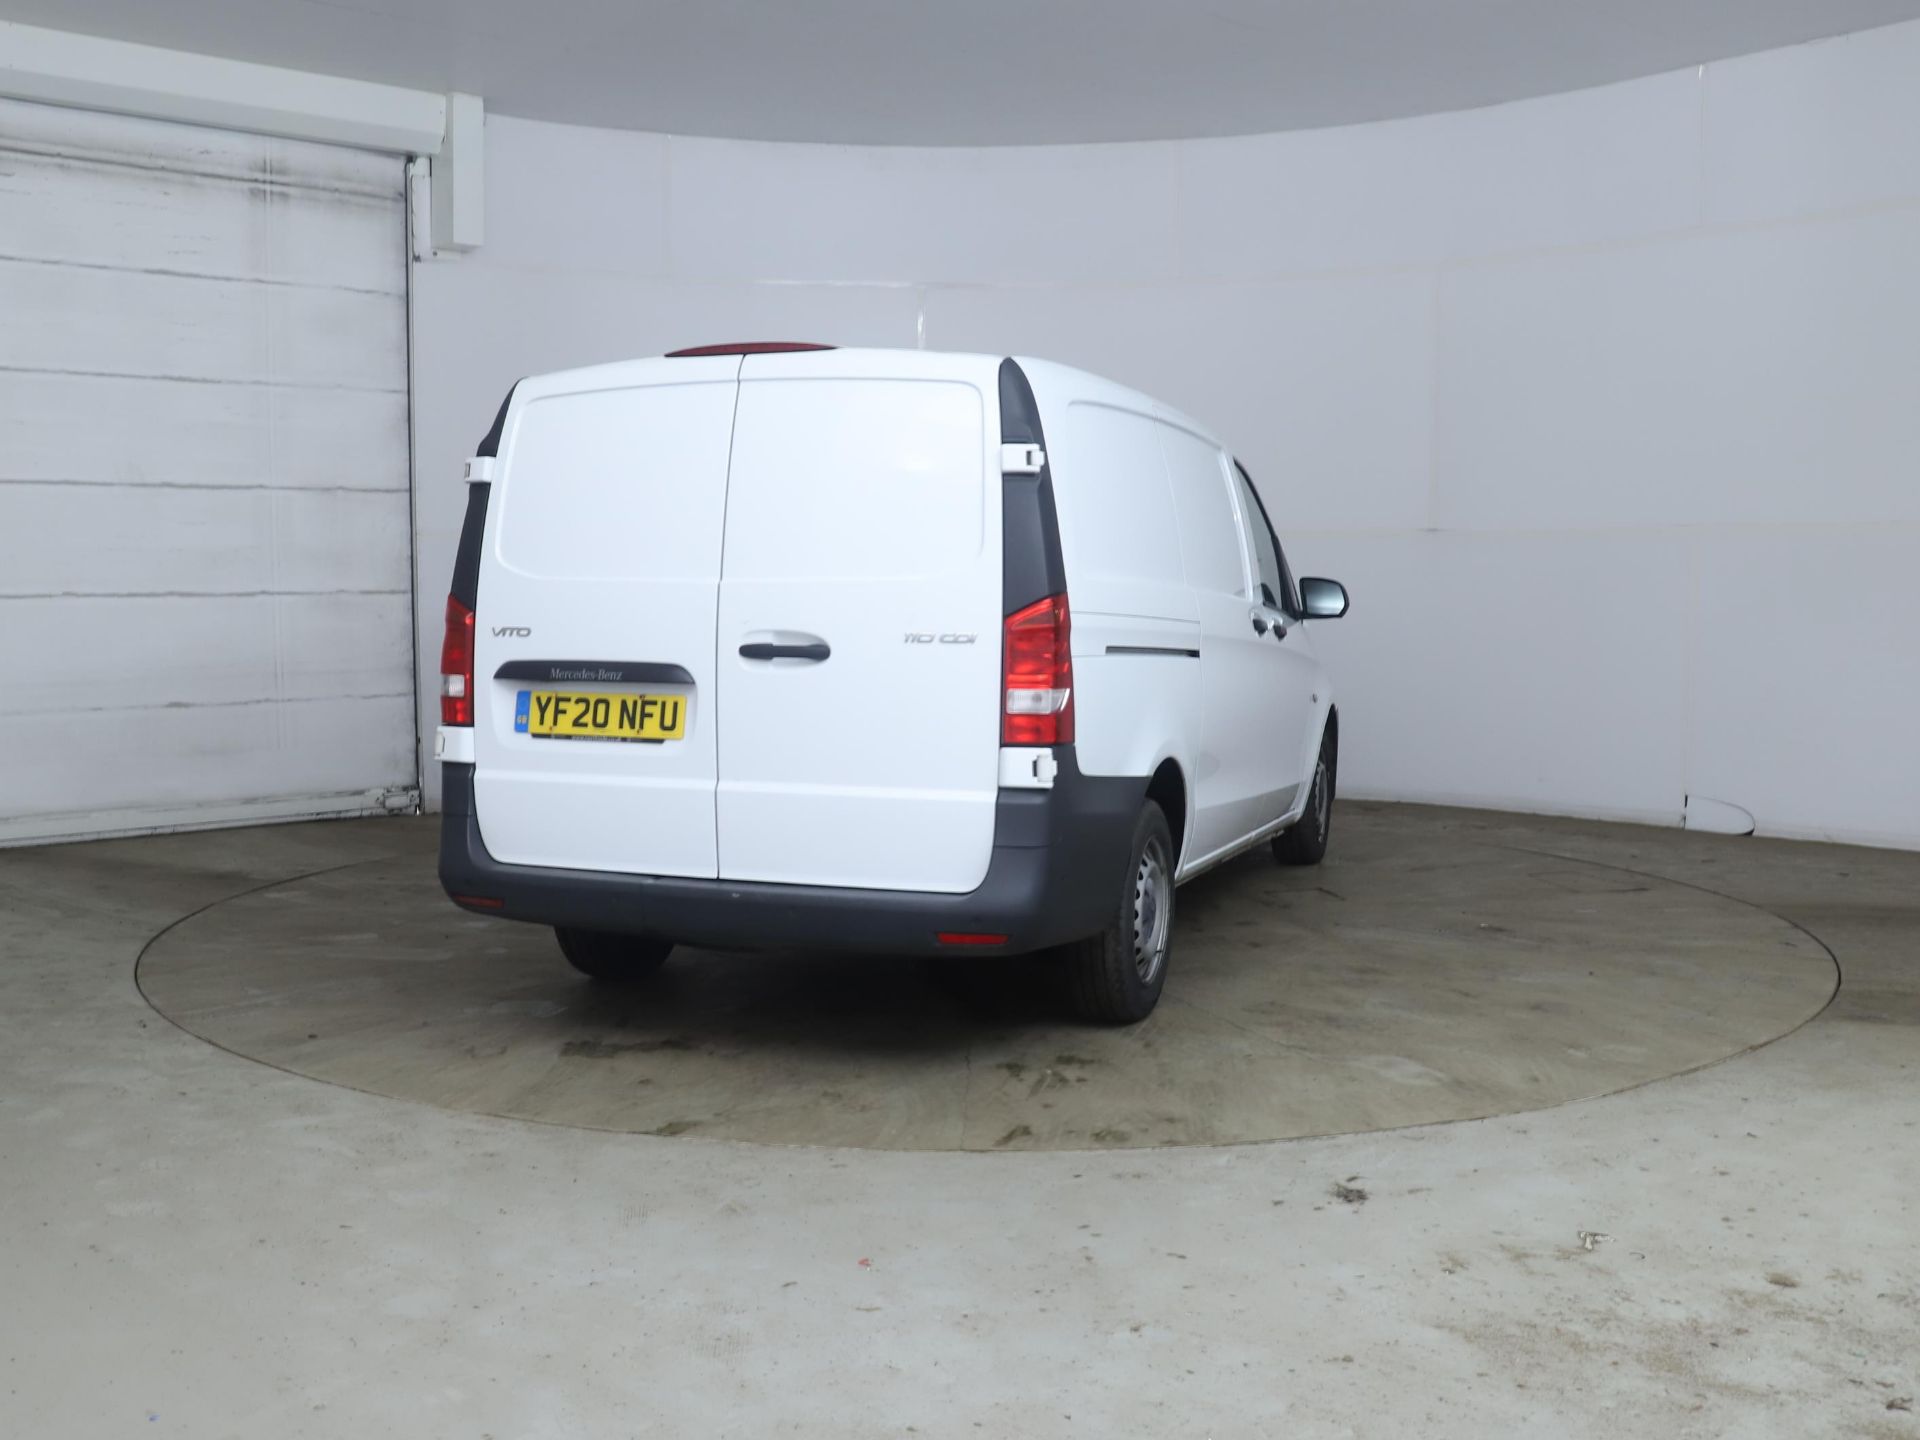 MERCEDES BENZ VITO CDI PURE - 2020 20 Reg - Only 74k Miles - 1 Owner From New - Parking Sensors - Image 3 of 12